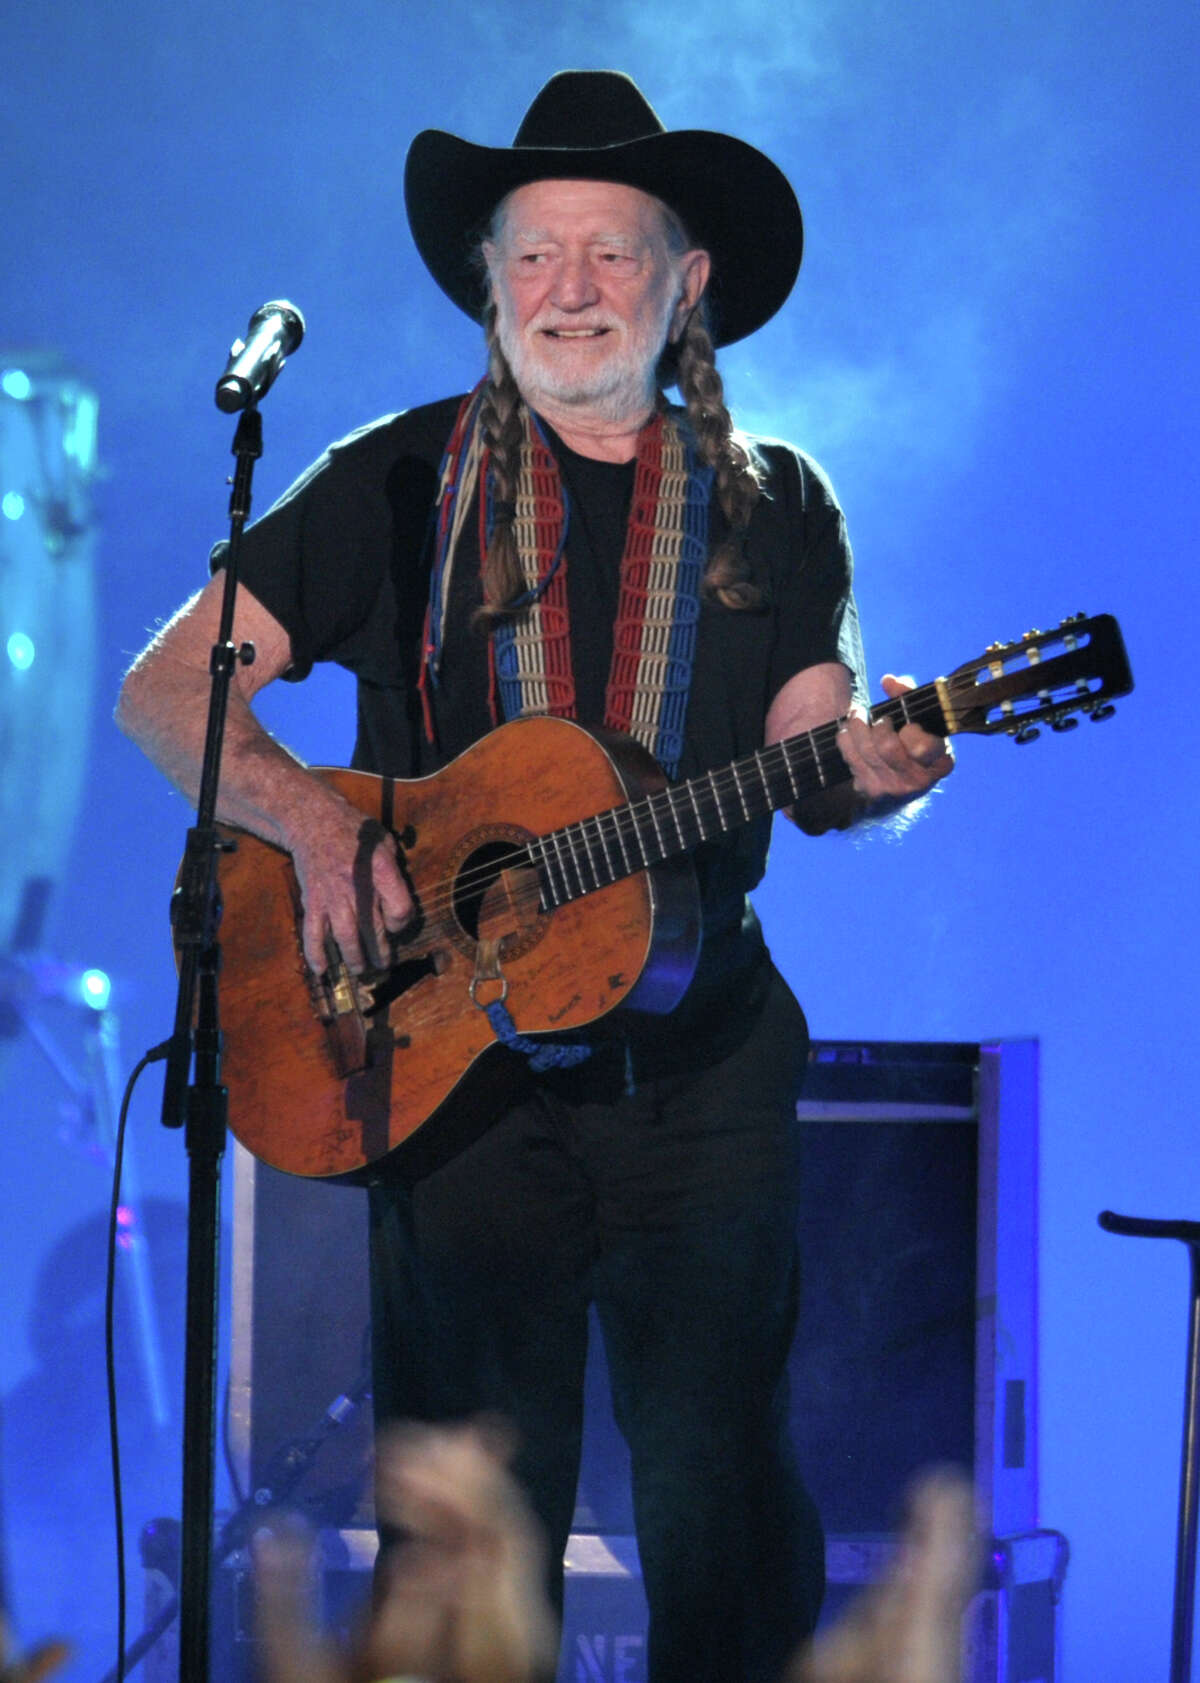 Willie Nelson performs at the 2012 CMT Music Awards on June 6, 2012 in Nashville, Tenn. The country music legend is scheduled to headline a private fundraiser June 23 at the Belle Haven Club in Greenwich. (Photo by John Shearer/Invision/AP)